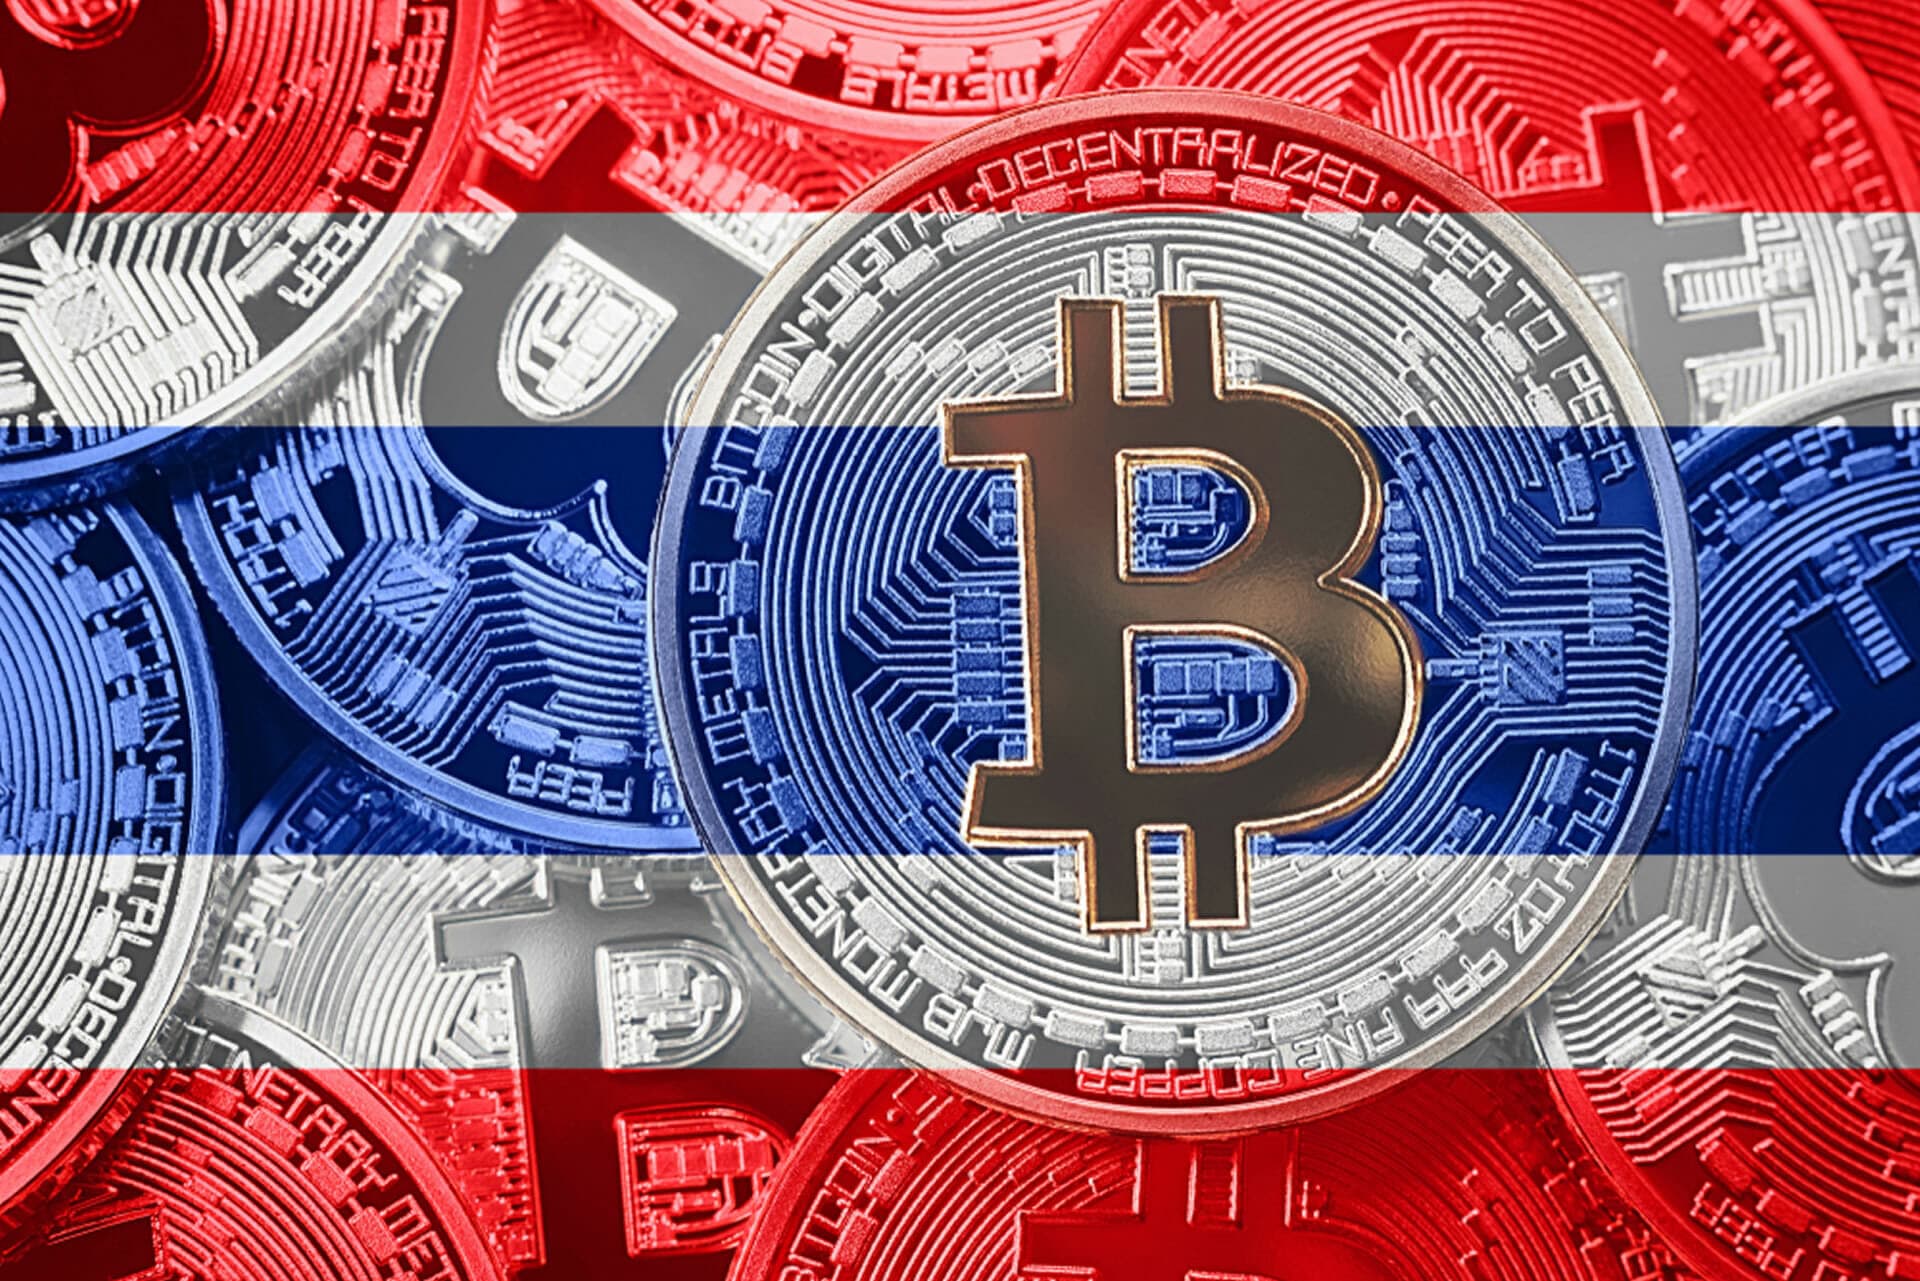 Thailand’s SEC Intensifies Action Against Misleading Cryptocurrency Advertisements